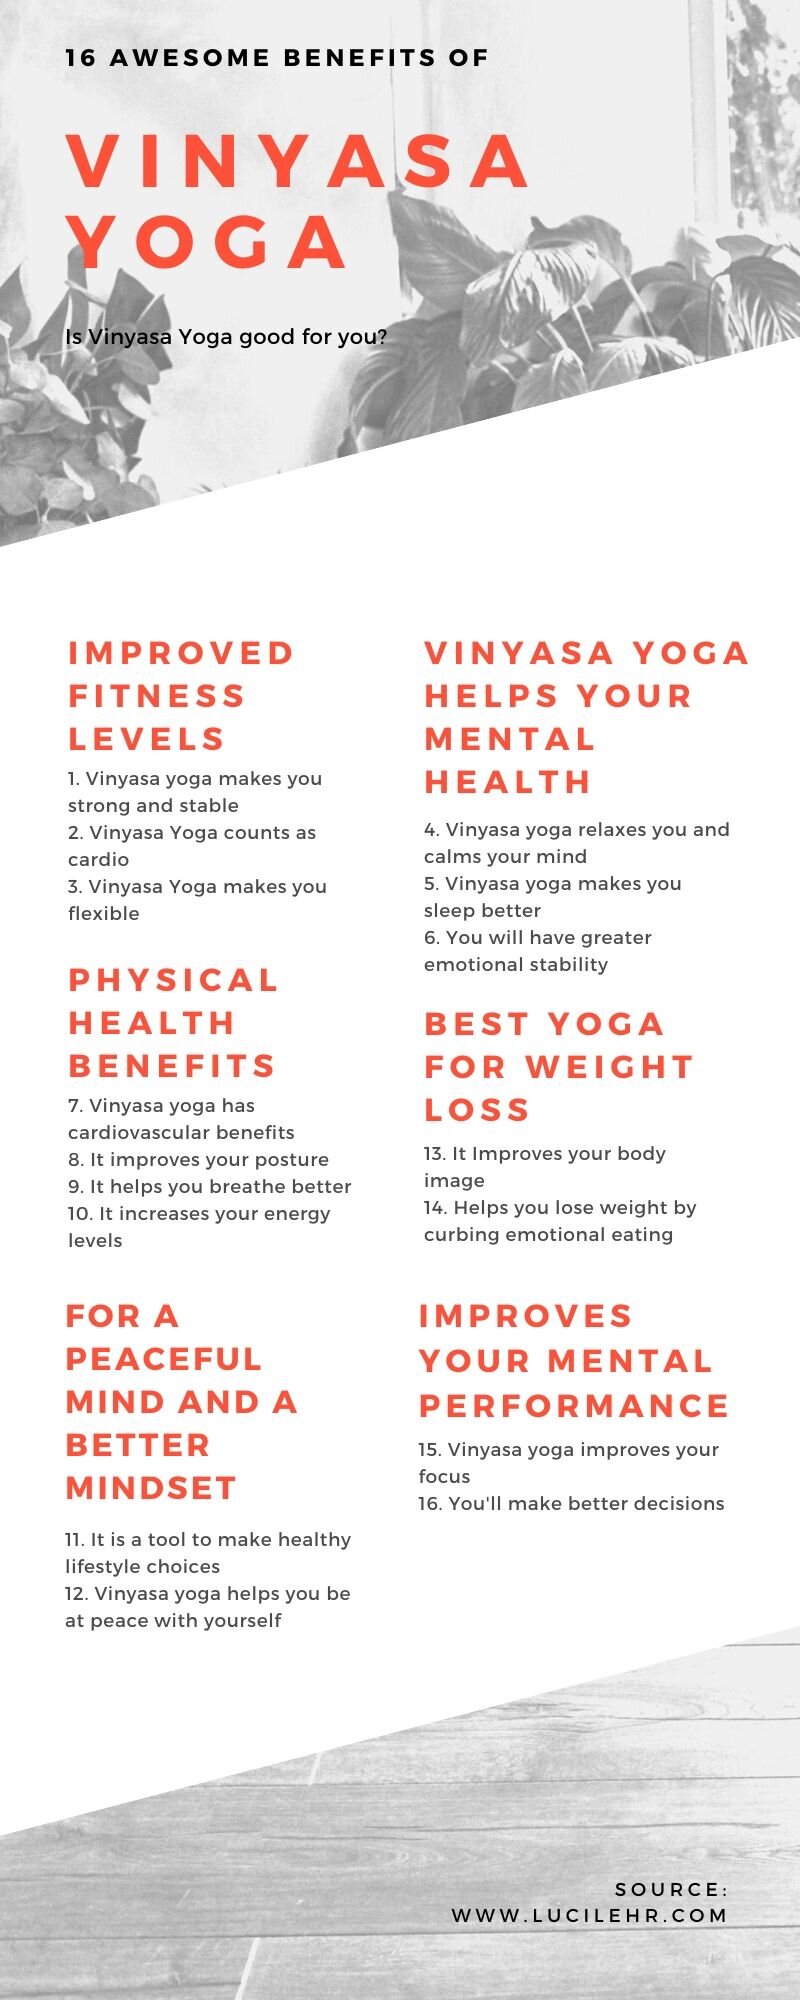 16 Benefits of Vinyasa Yoga That Will Take your Practice to the Next Level!